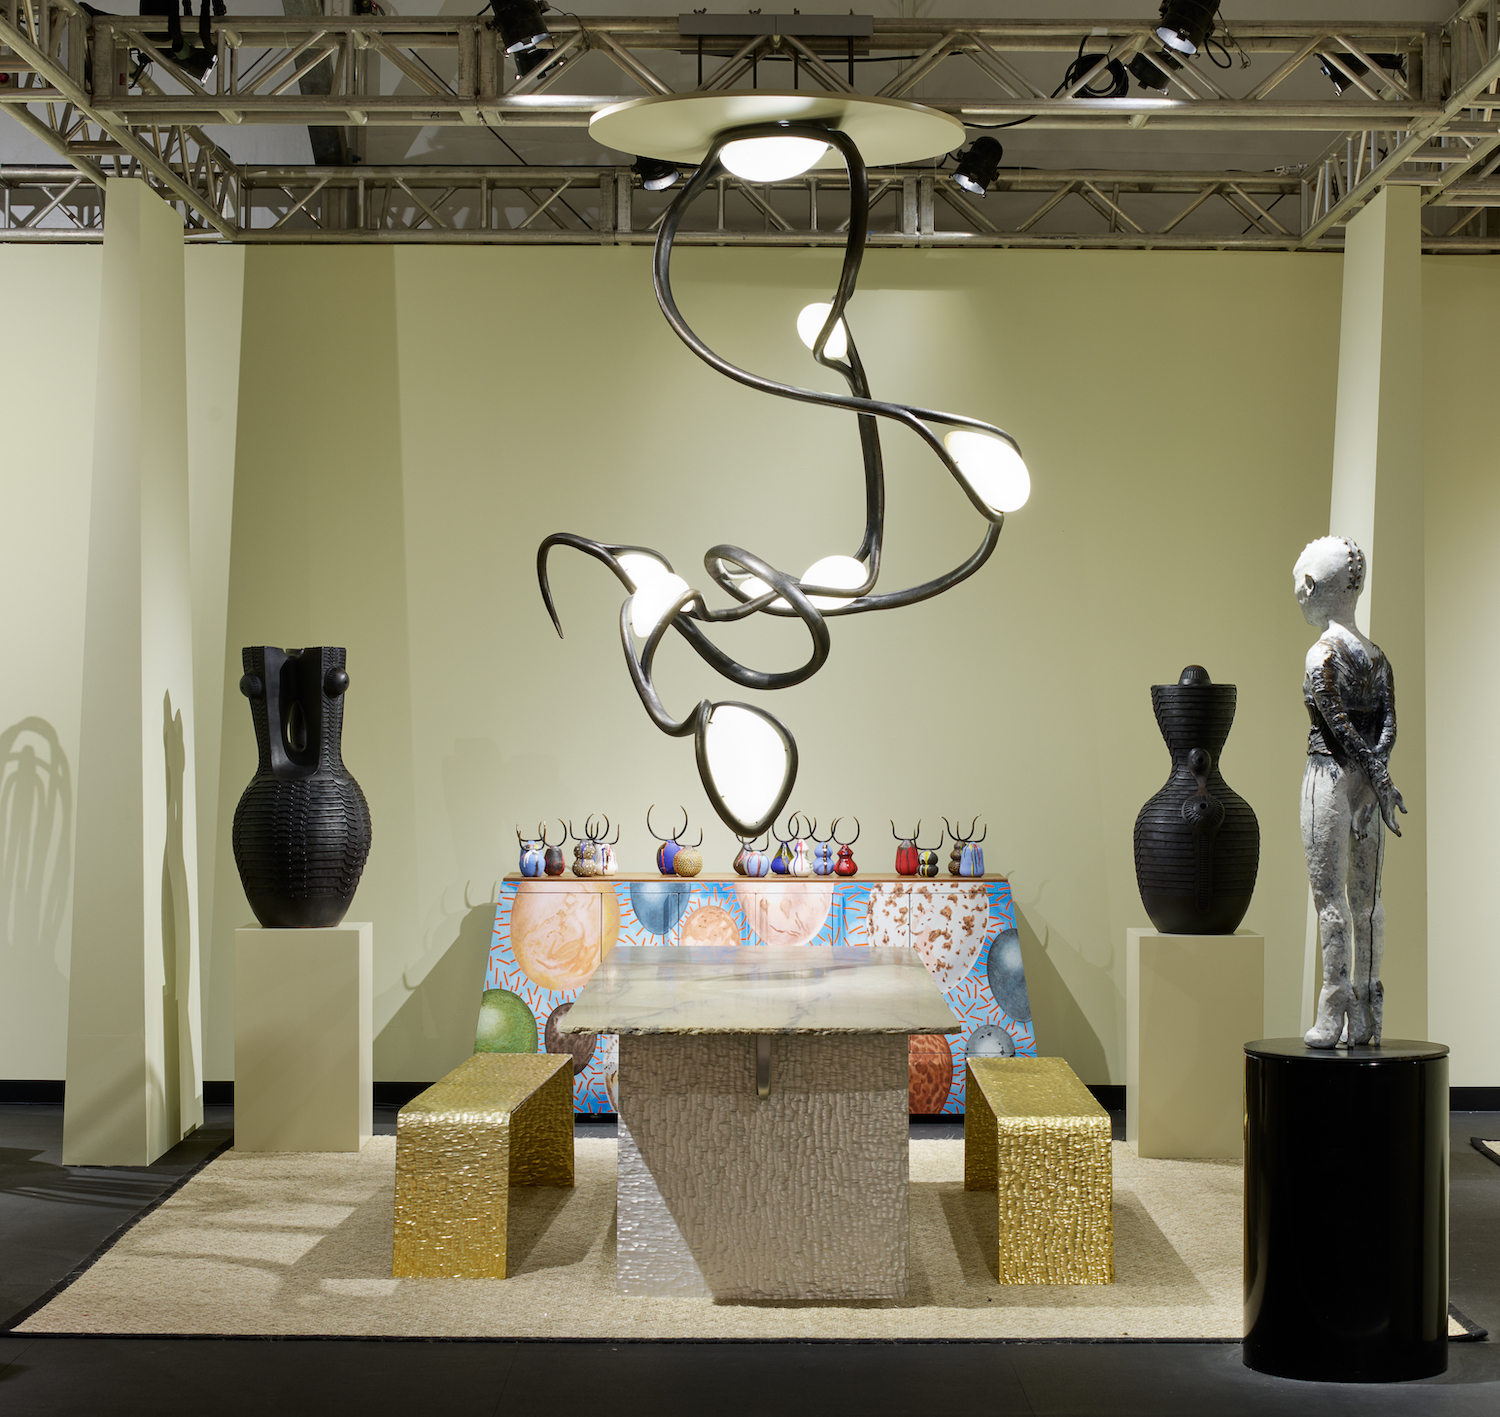 Southern Guild booth at Design Miami 2022 with Rich Mnisi’s Nyoka console and Vutlhari chandelier in Effect Magazine